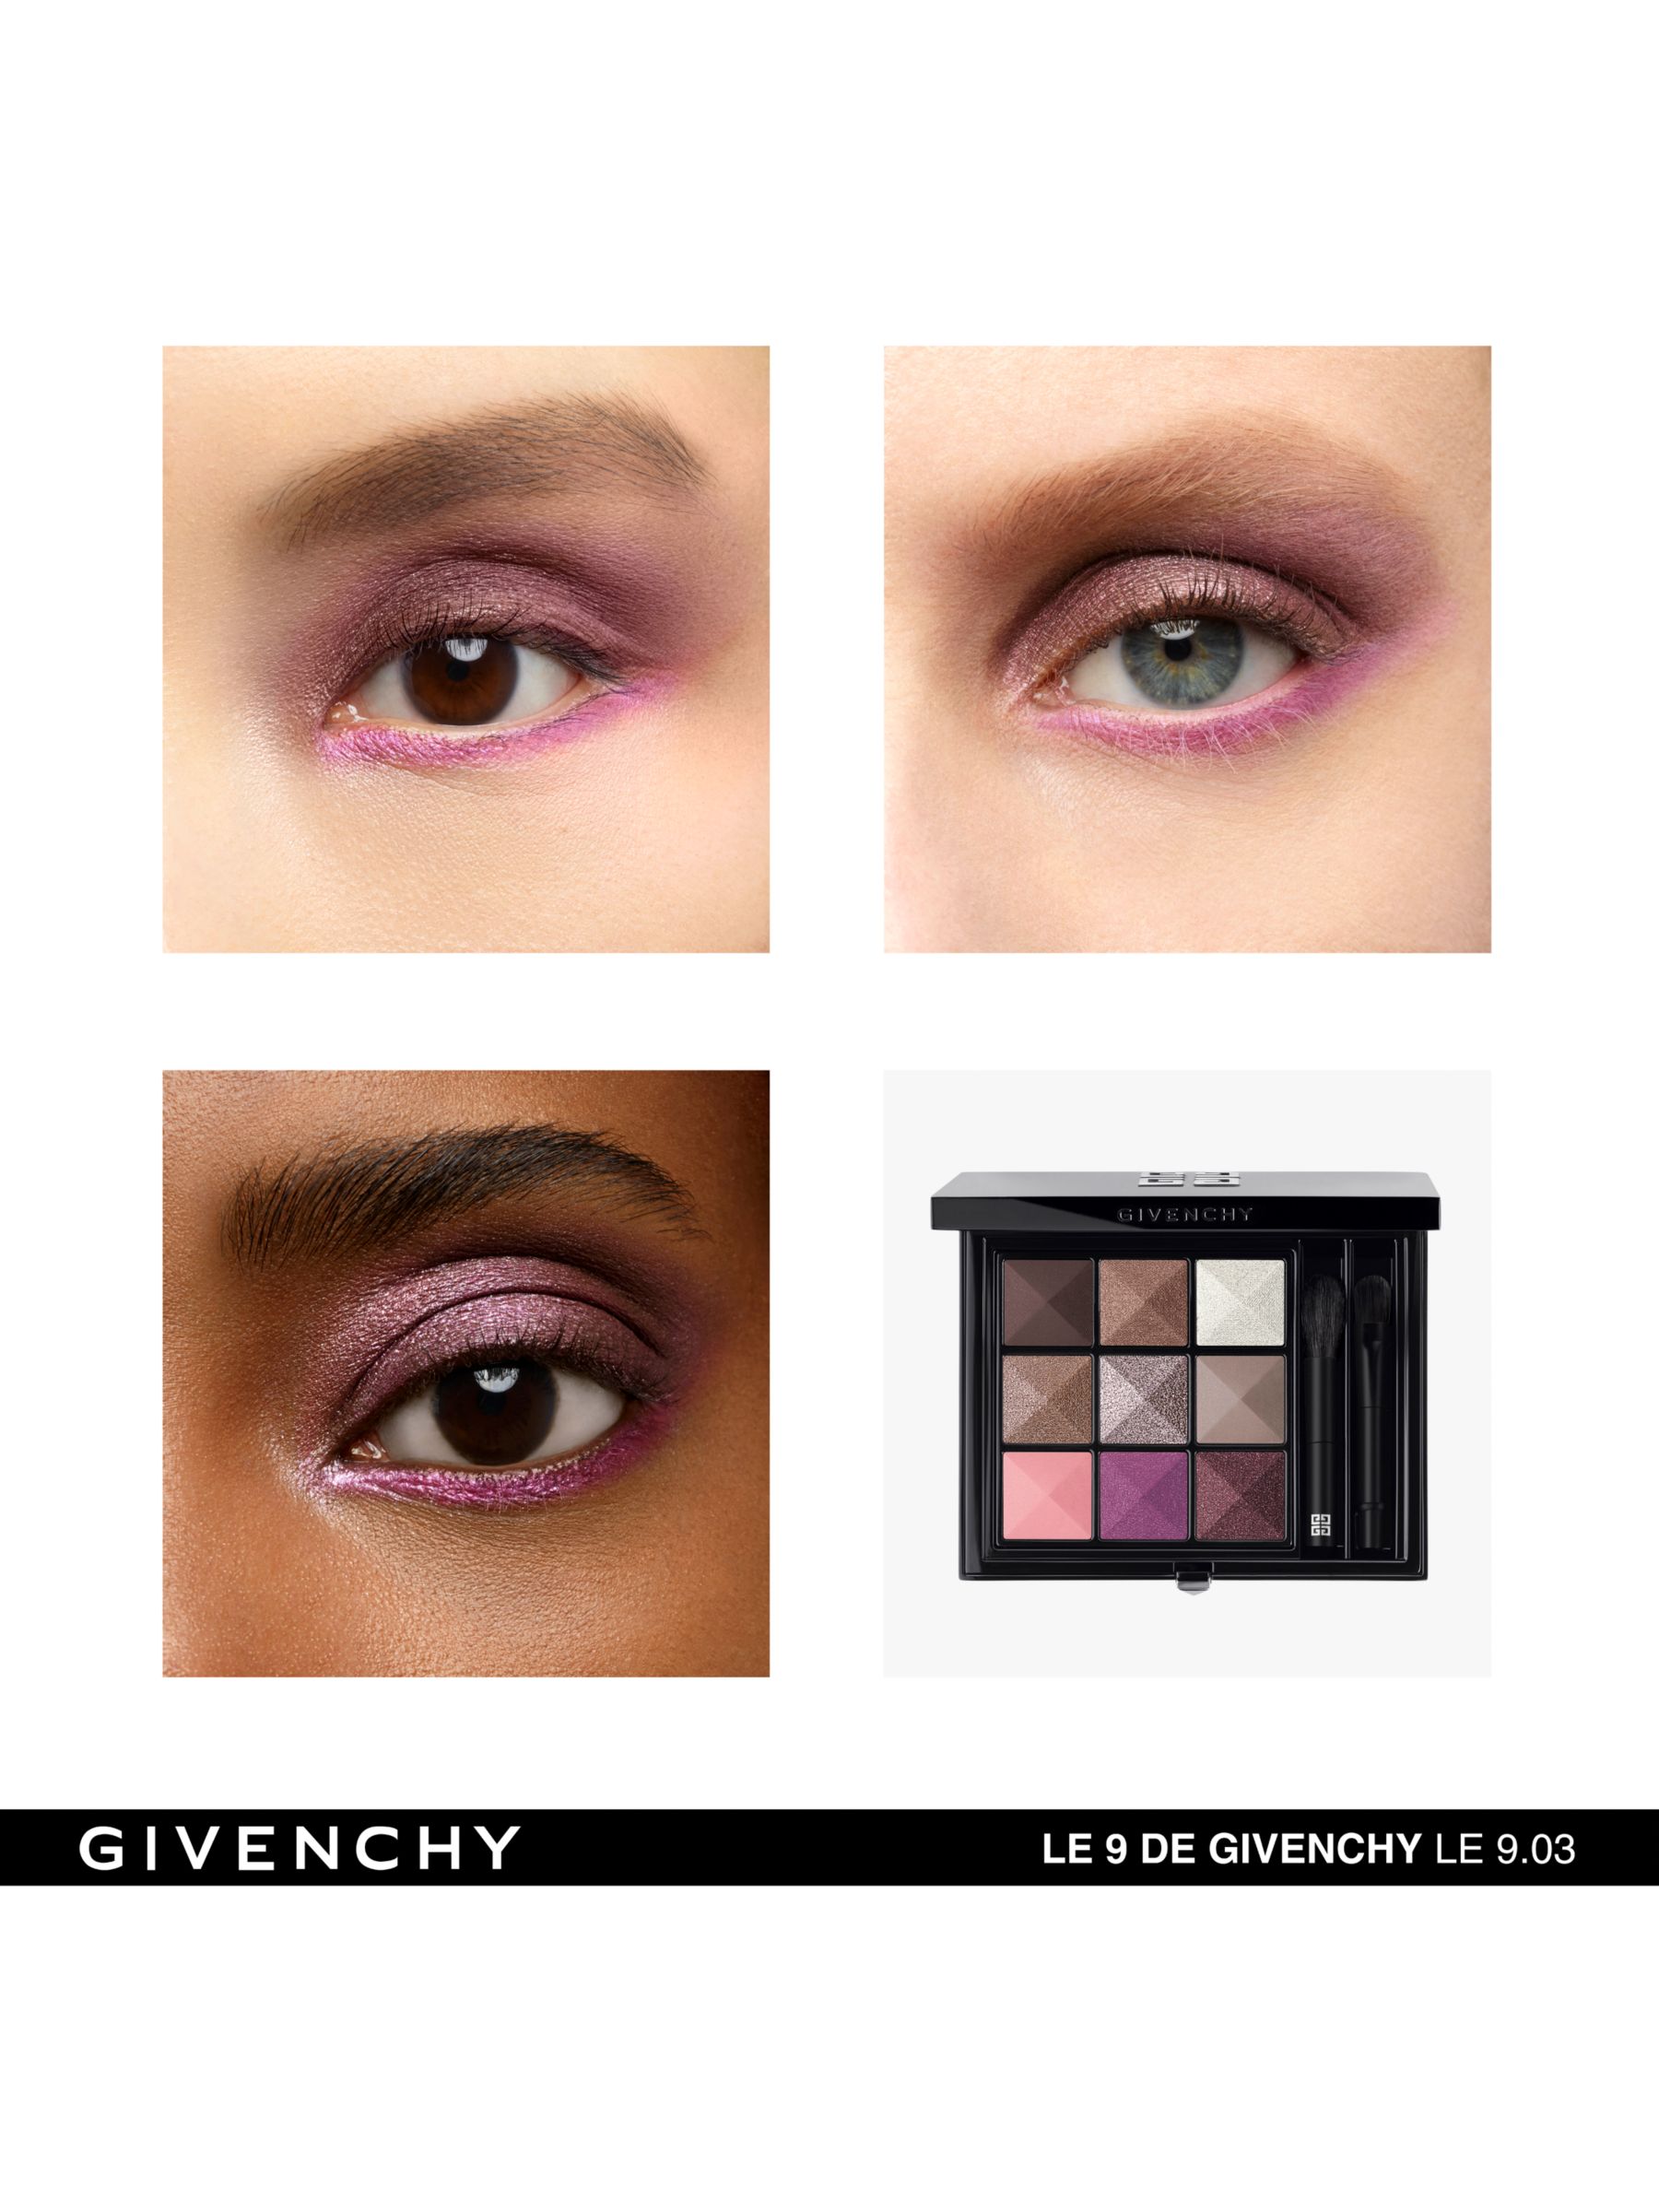 Givenchy Le 9 de Givenchy Multi-Finish Eyeshadow Palette, 9.03 3